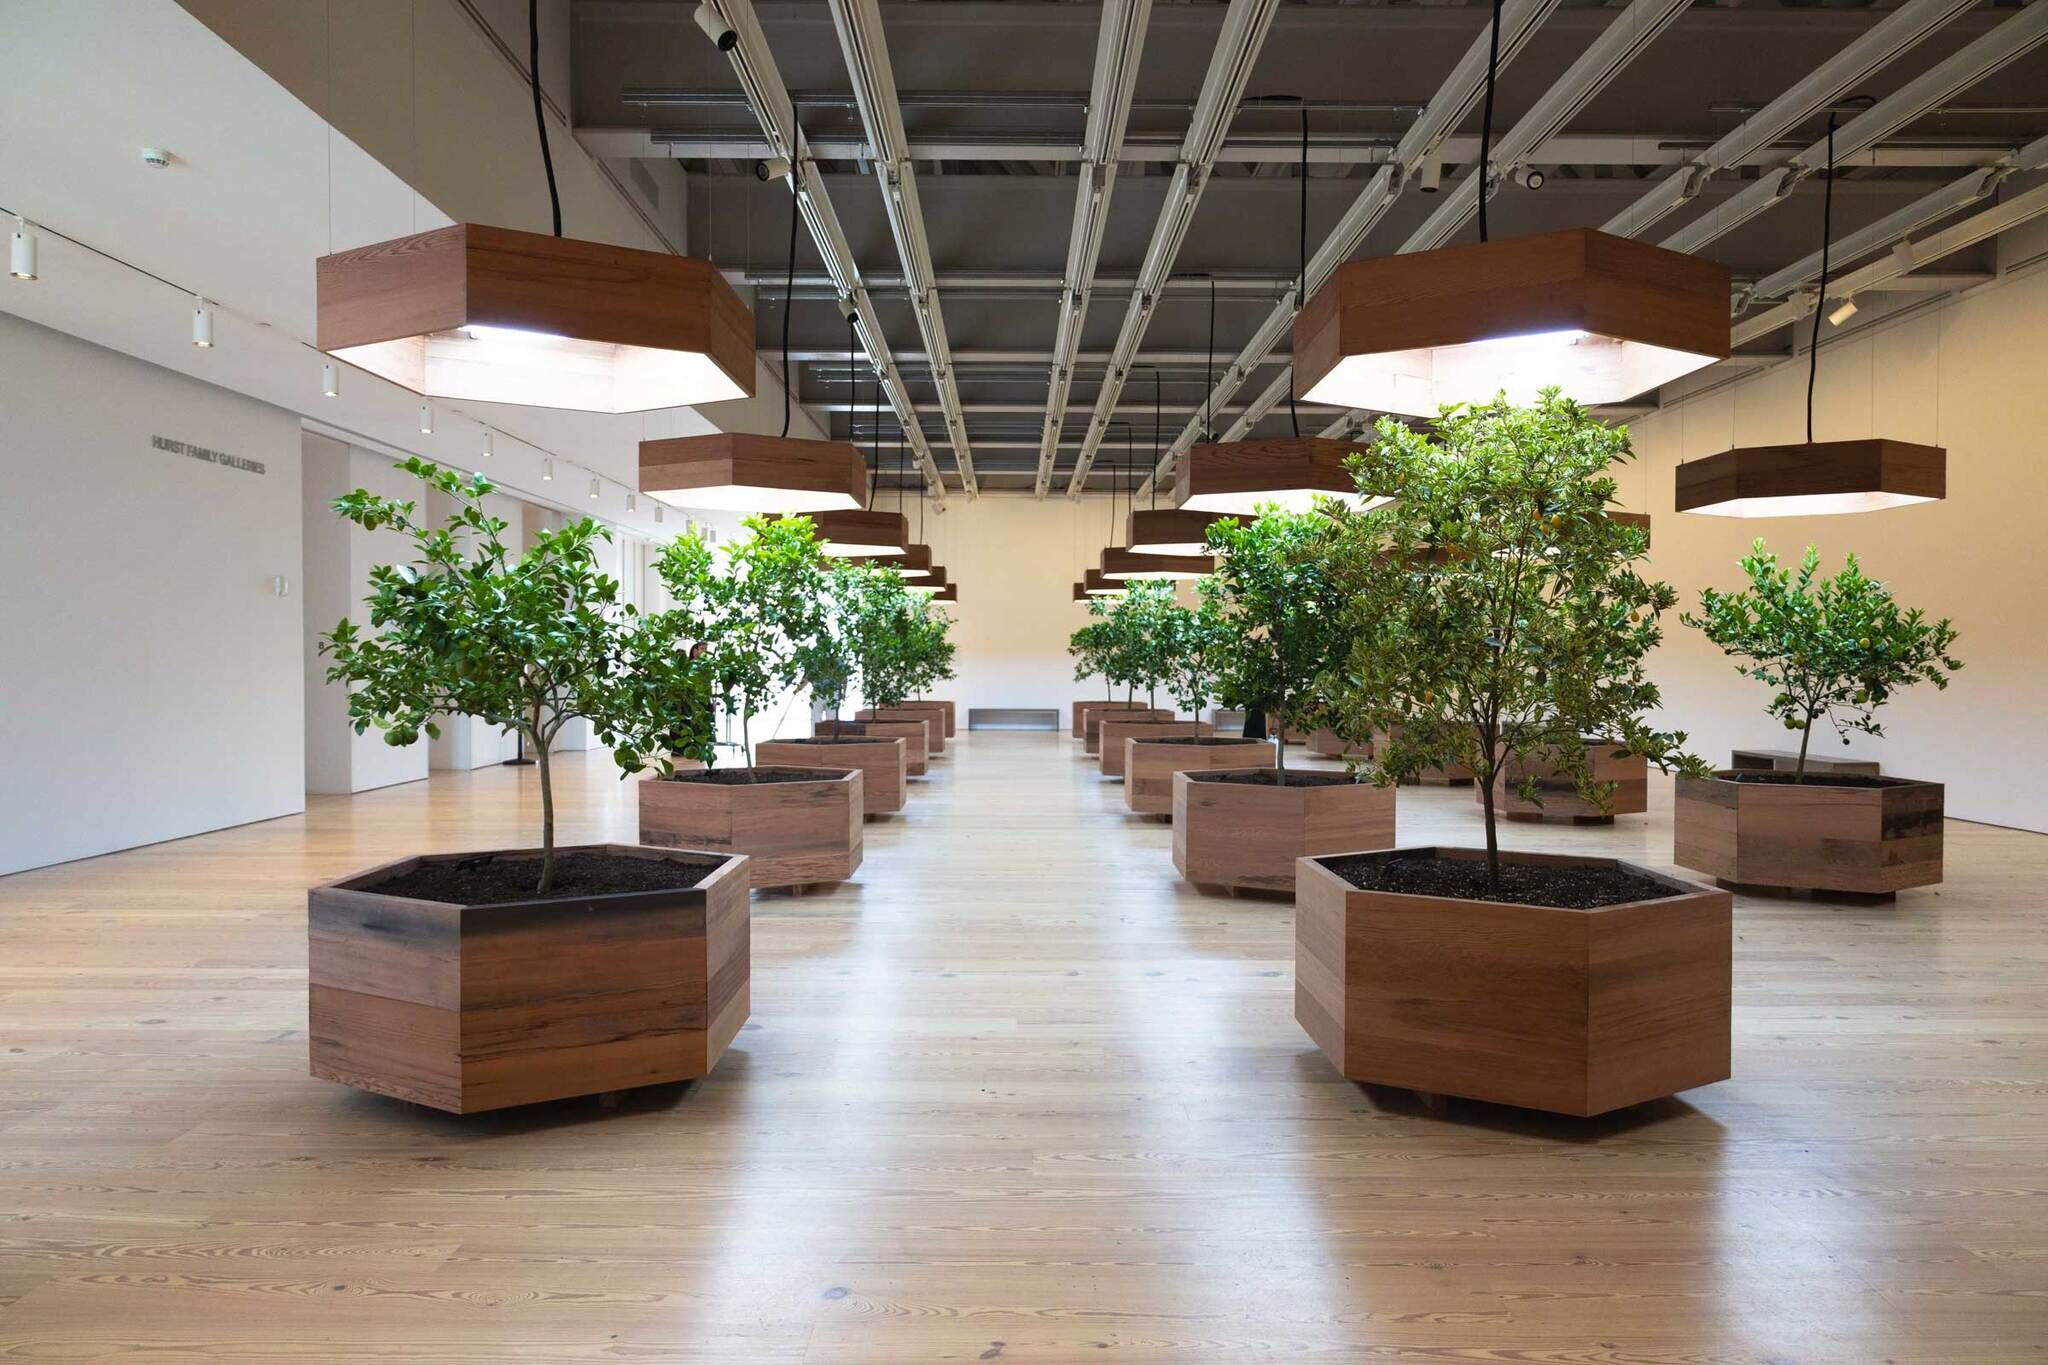 Indoor garden with small trees in wooden planters, illuminated by large hanging lights, arranged in rows on a wooden floor.